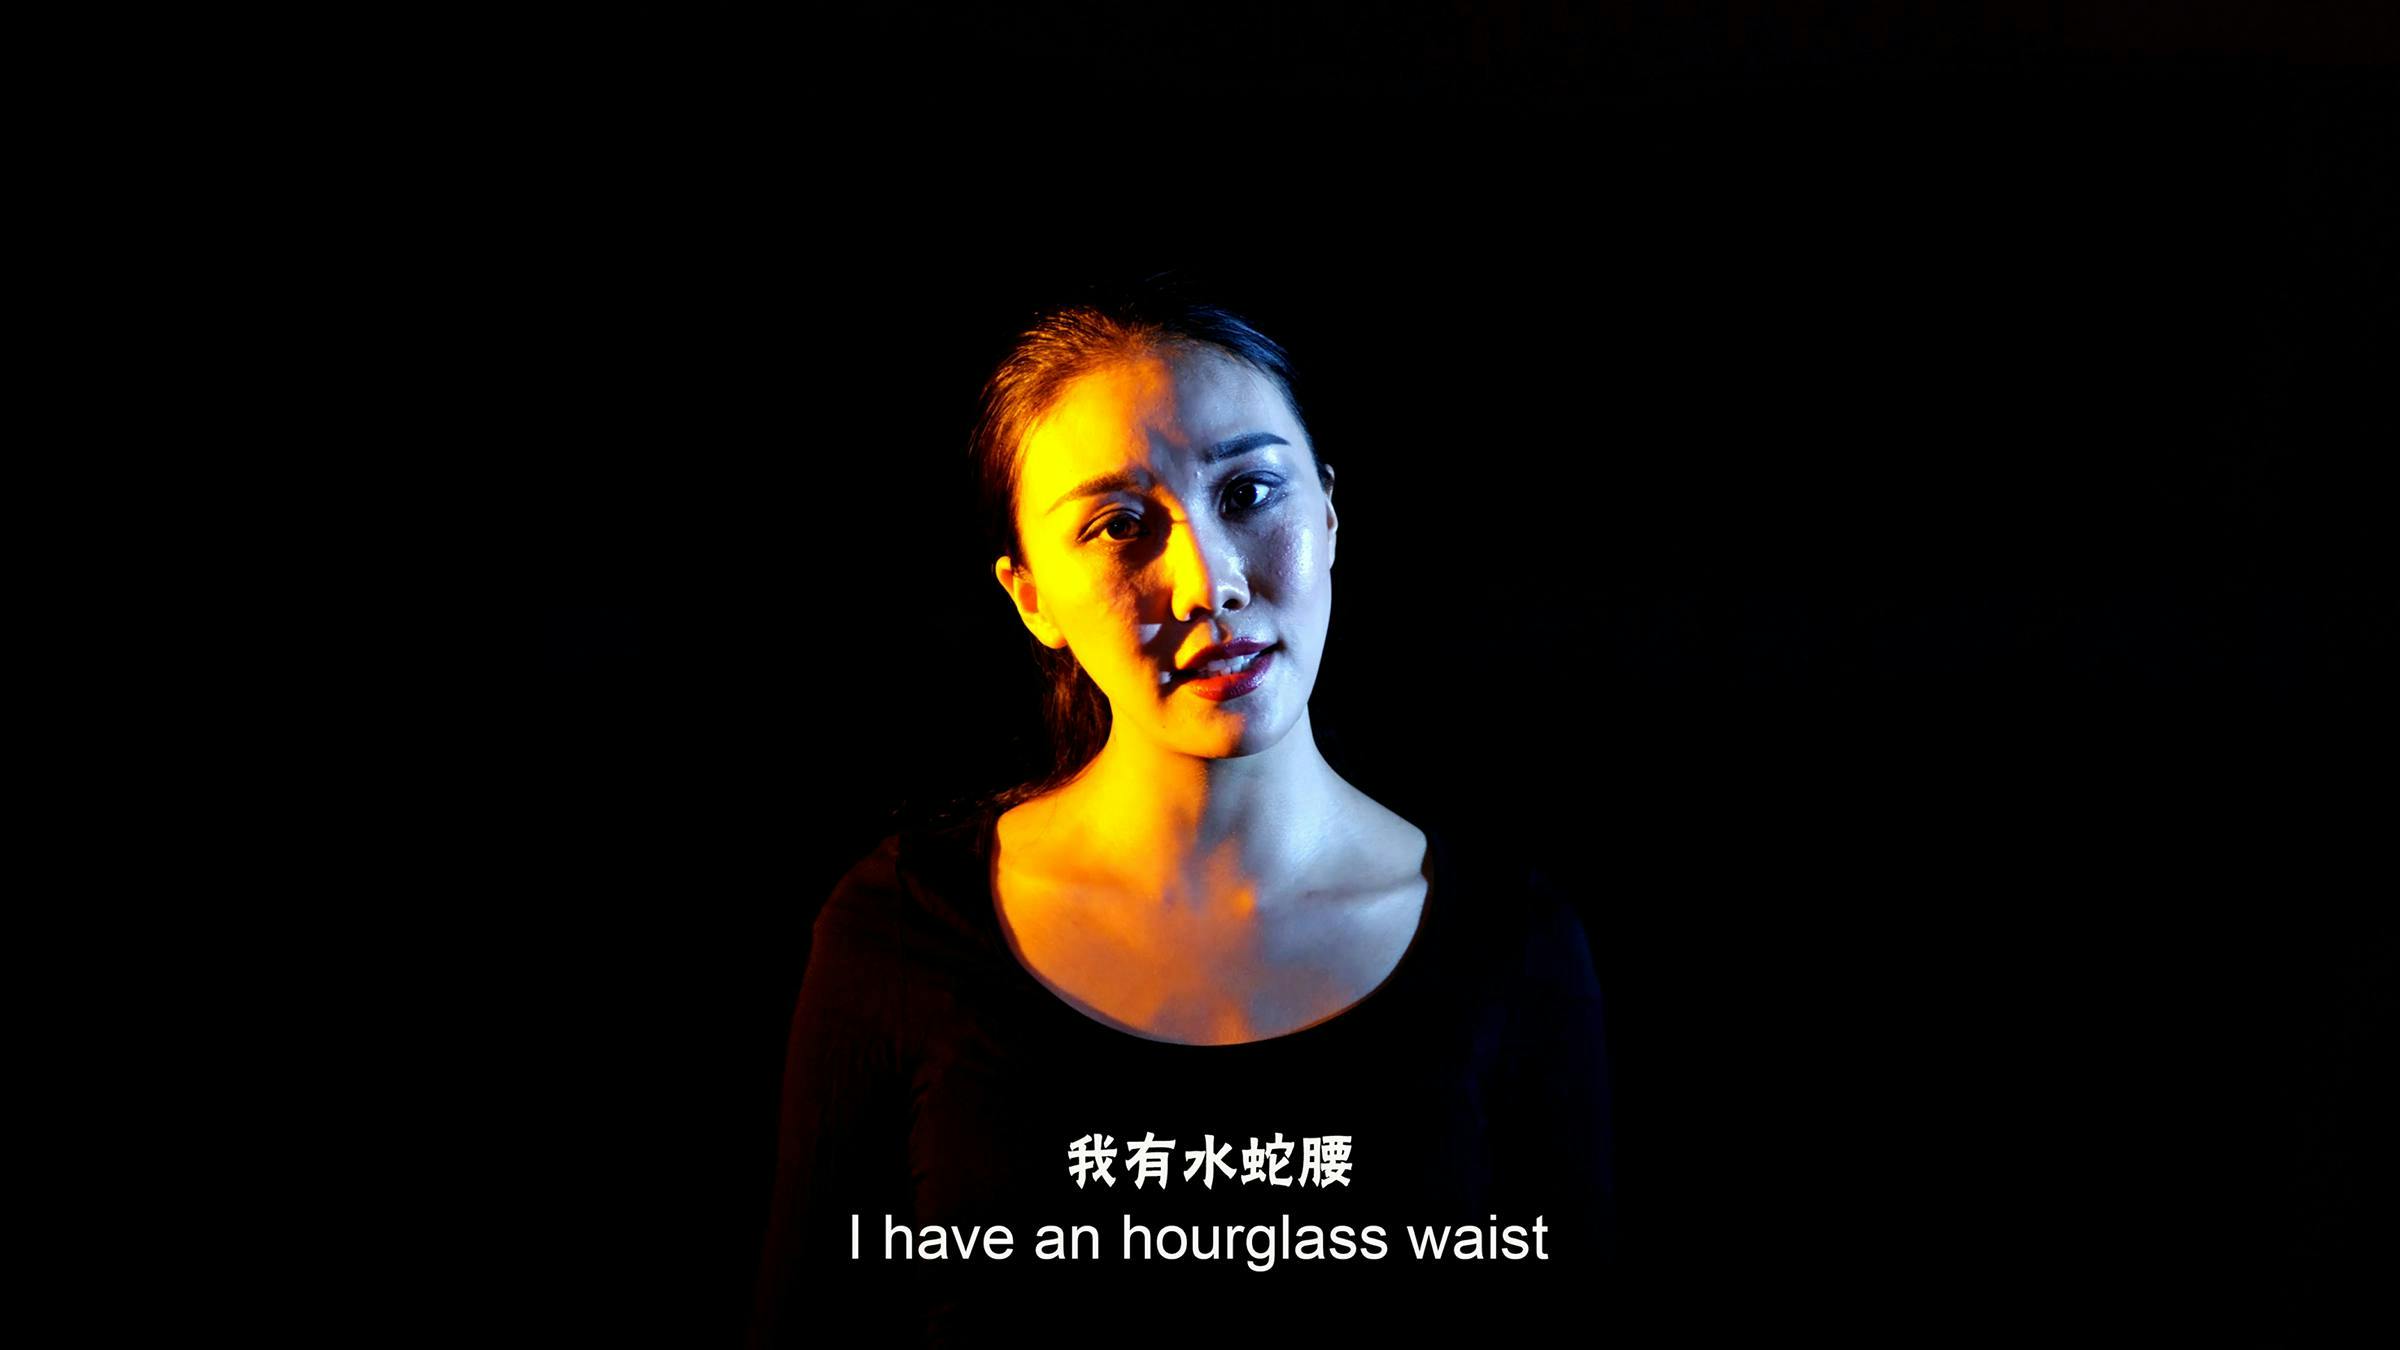 The face of a  Chinese woman with her head titled to the side. The back ground is black and a white subtitle says 'I have an hourglass waist' above this the Chinese translation is written.